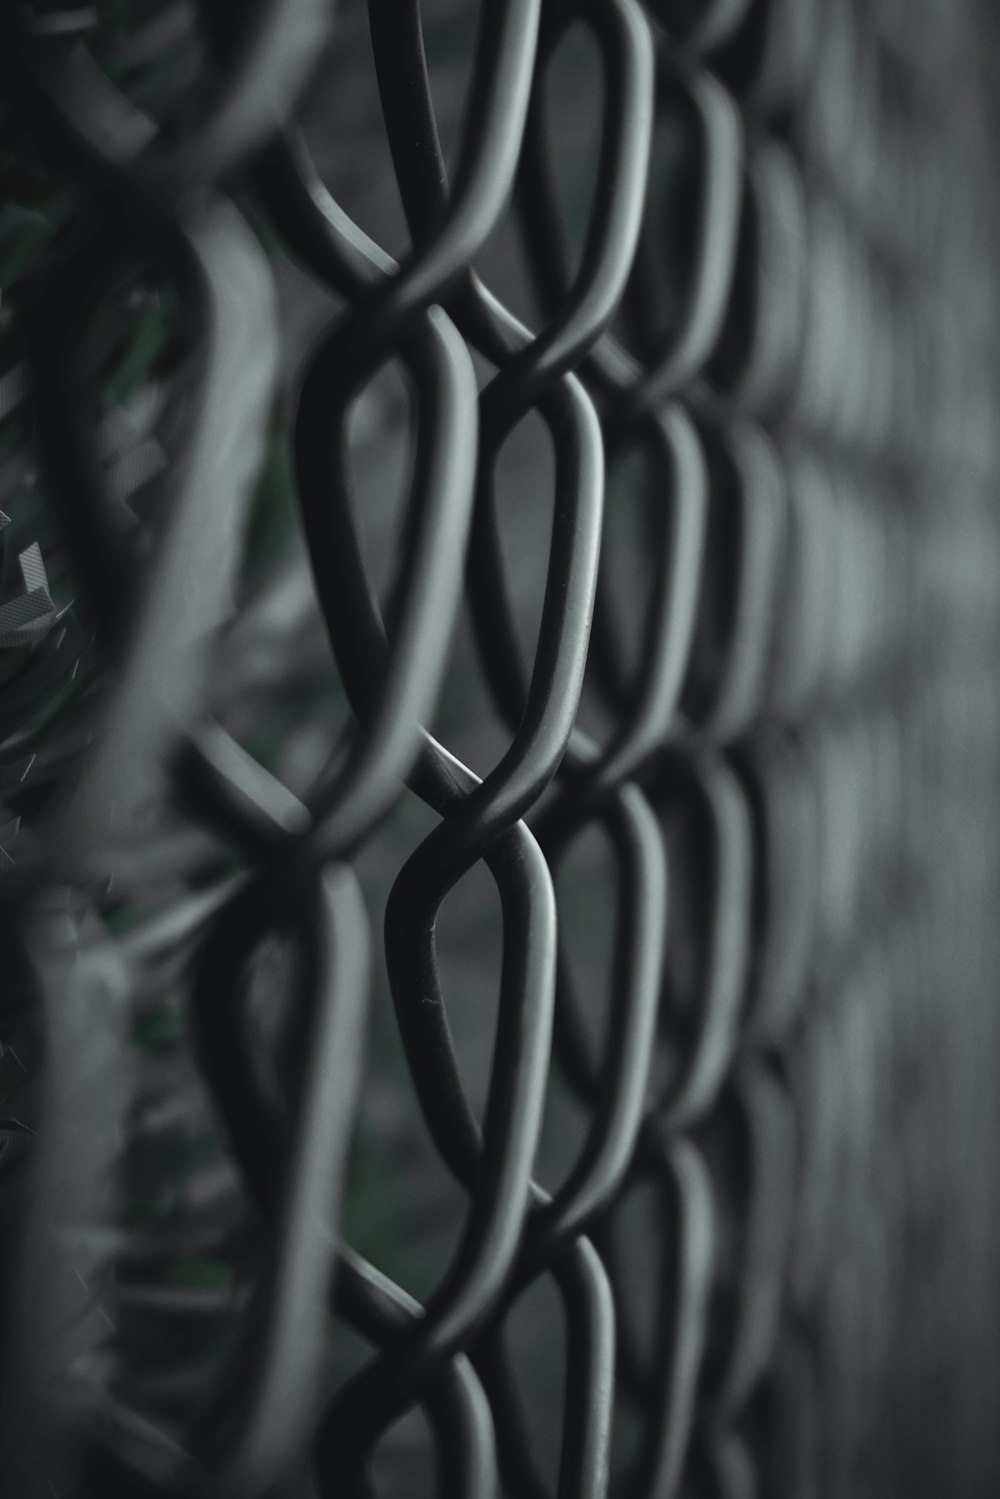 a black and white photo of a chain link fence